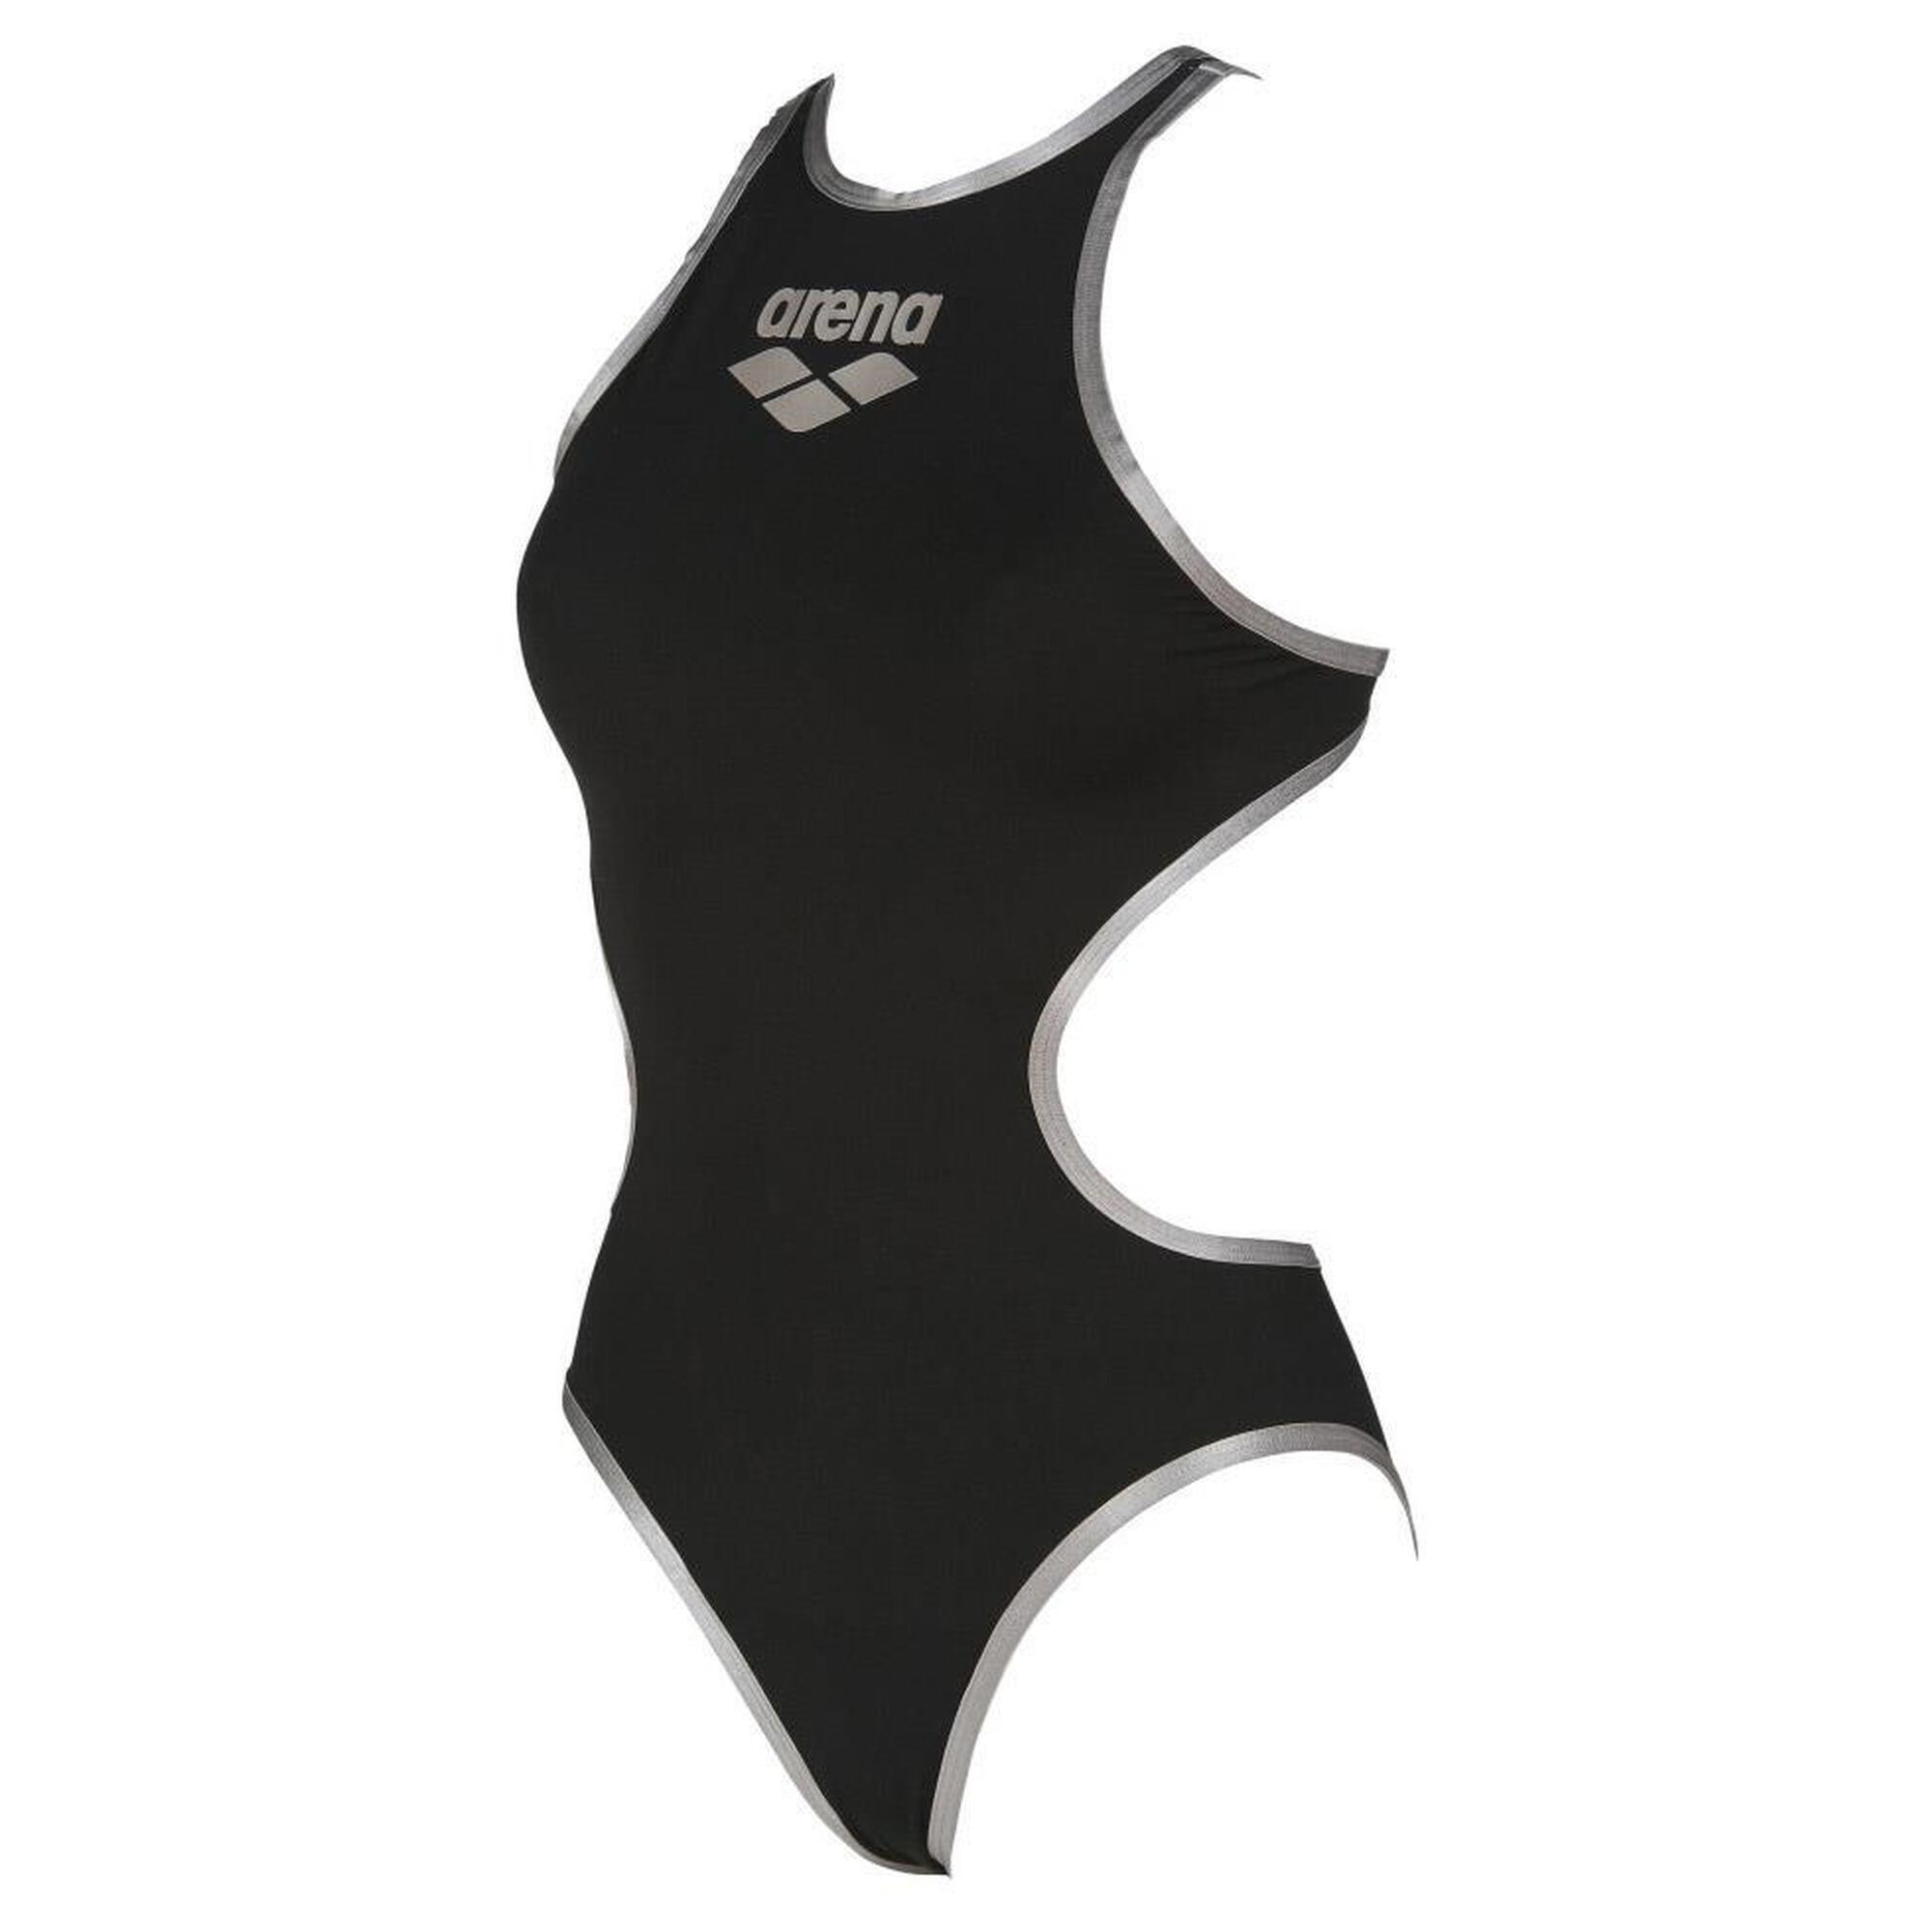 ARENA Arena Women's One Big Logo One Piece Swimsuit - Black / Silver